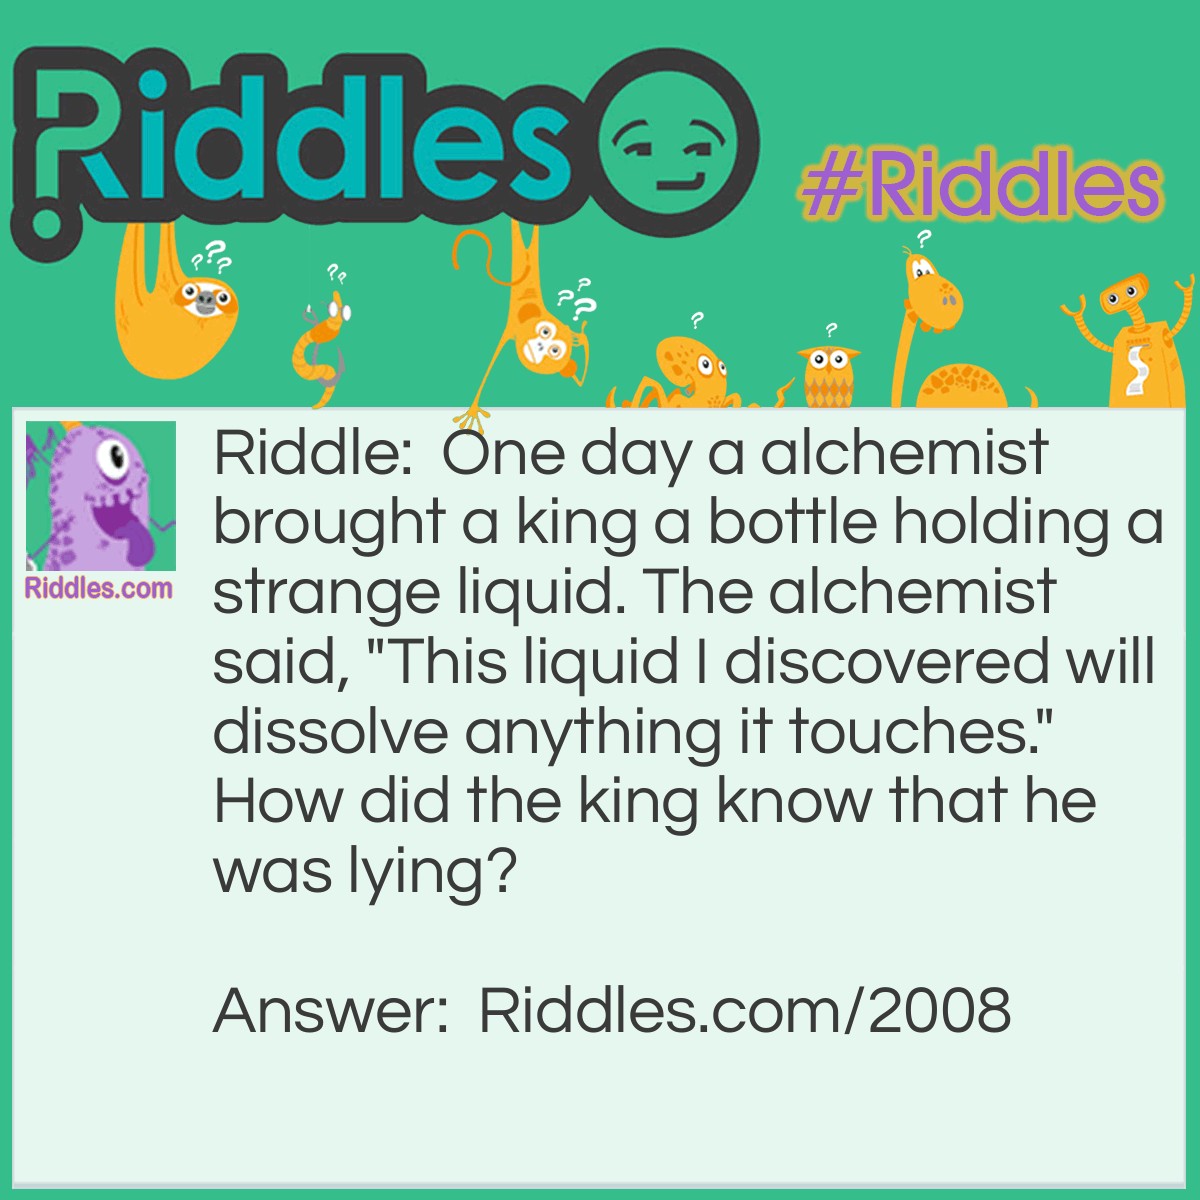 Riddle: One day a alchemist brought a king a bottle holding a strange liquid. The alchemist said, "This liquid I discovered will dissolve anything it touches." How did the king know that he was lying? Answer: The king knew if what he said was true the bottle would get dissolved!